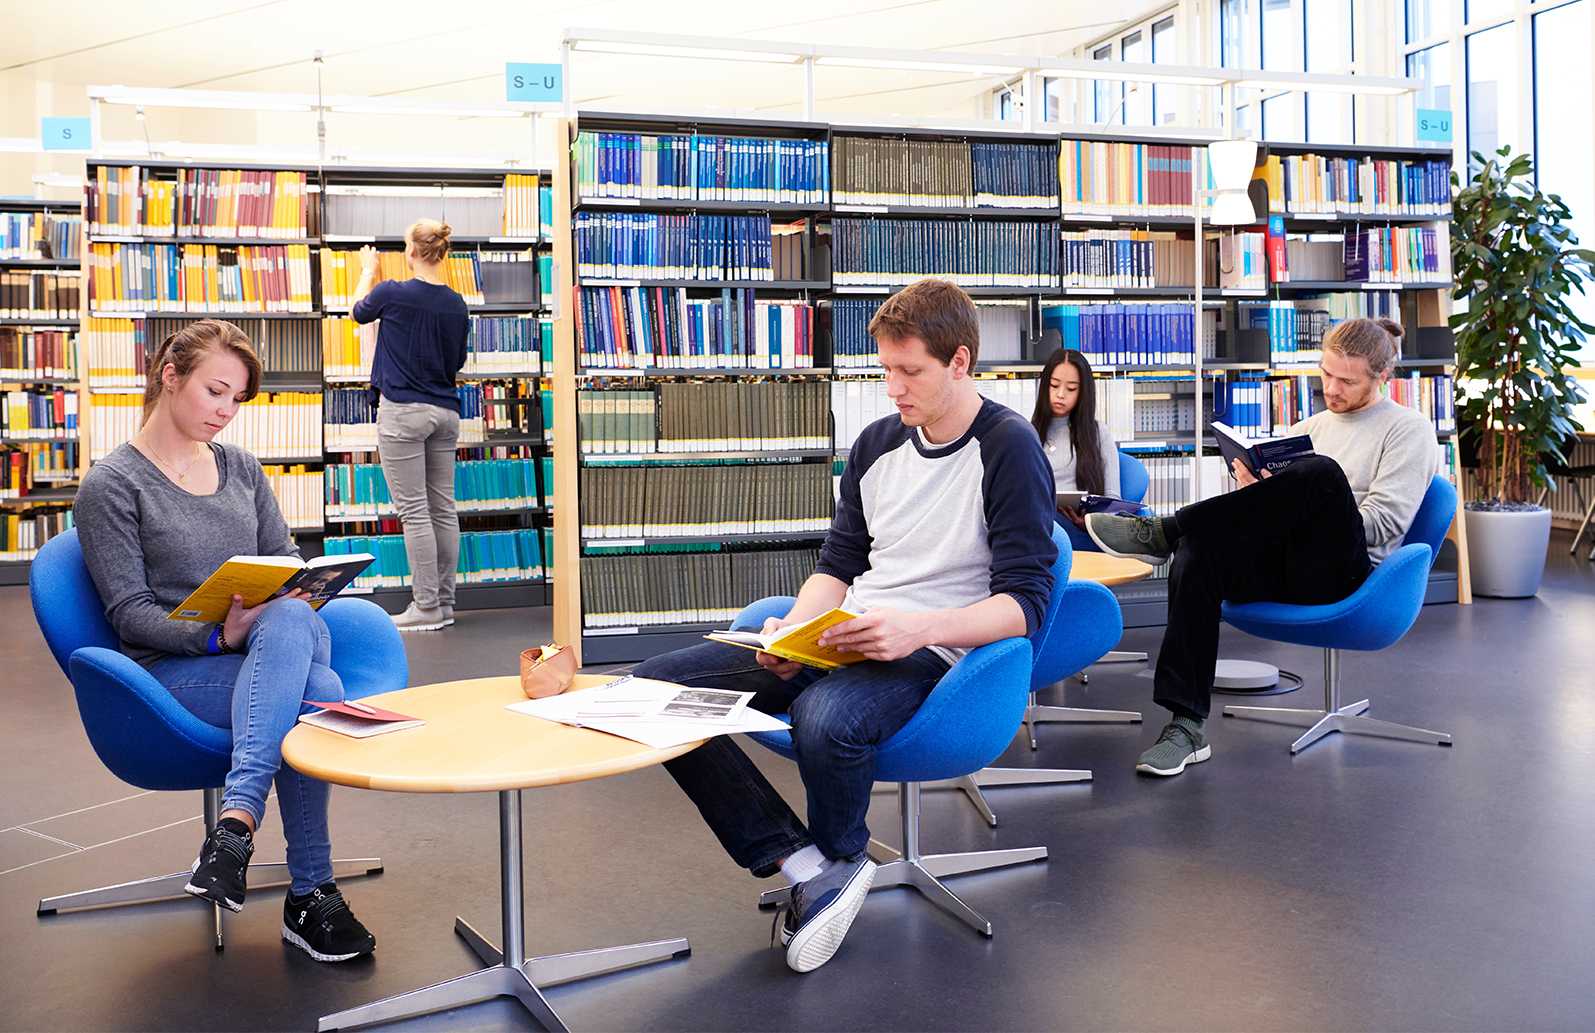 Users of the Mathematics Library